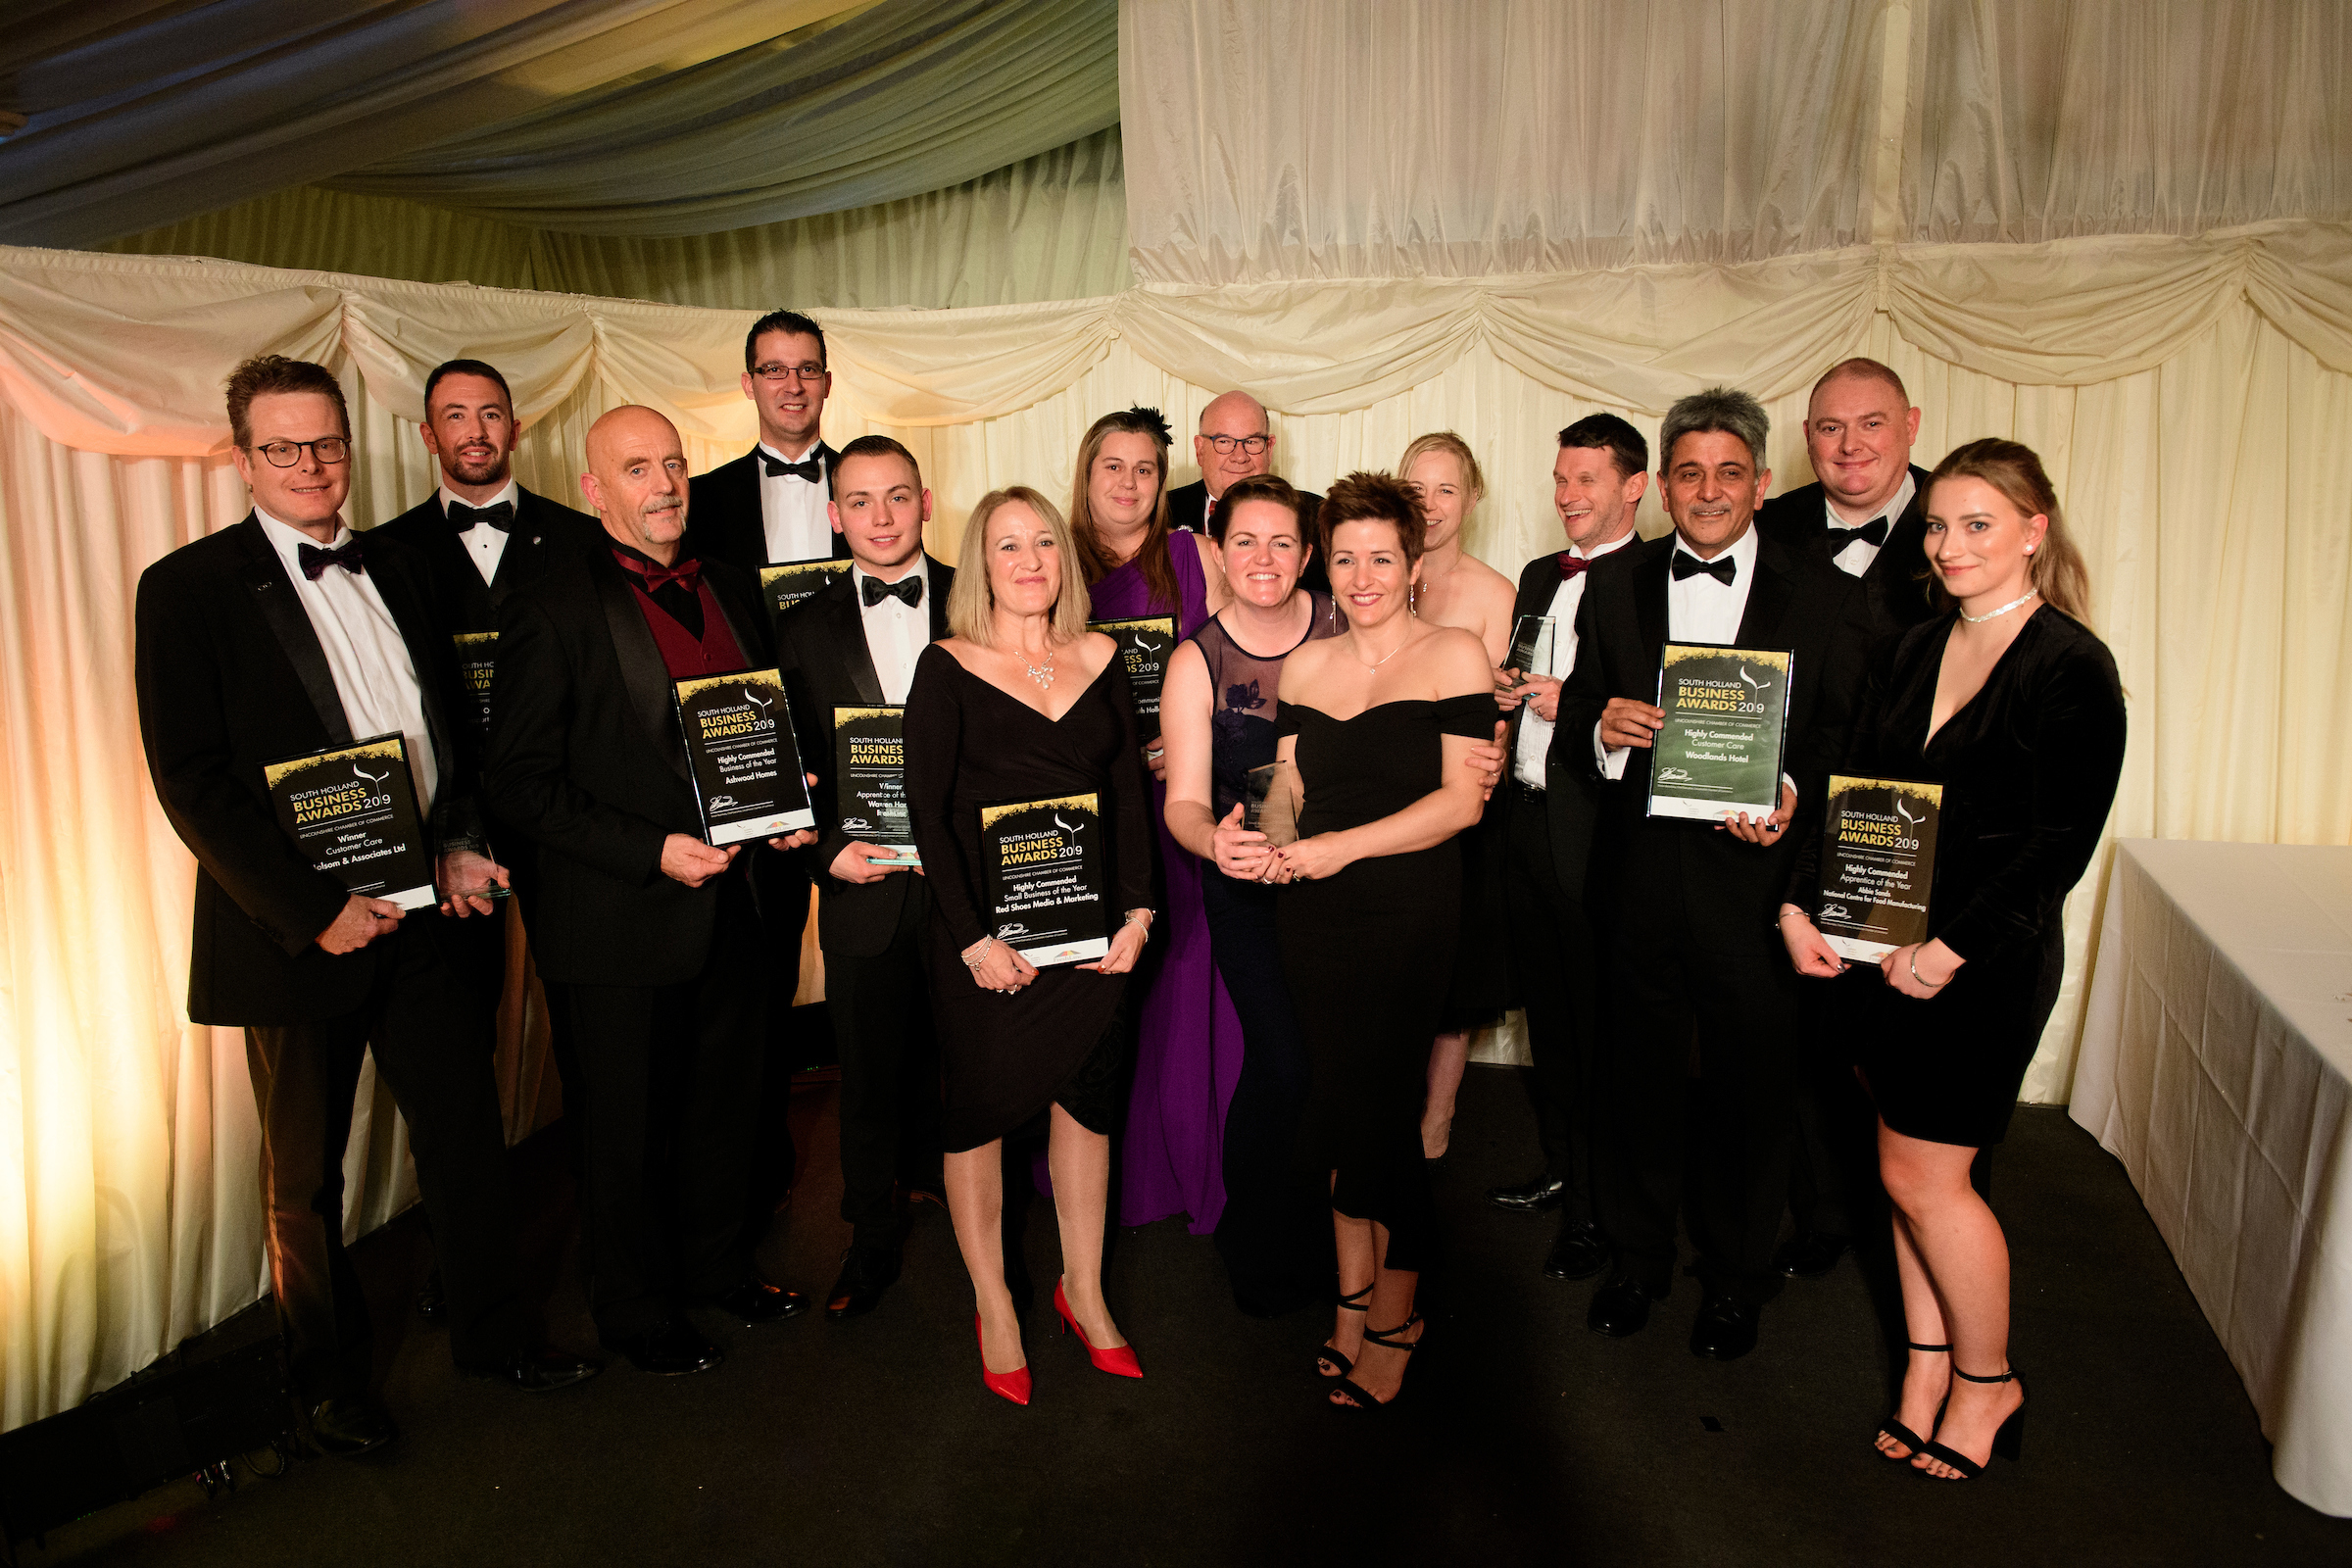 Group of people in eveningwear holding framed certificates, trophies, posing and smiling at the South Holland Business Awards 2019